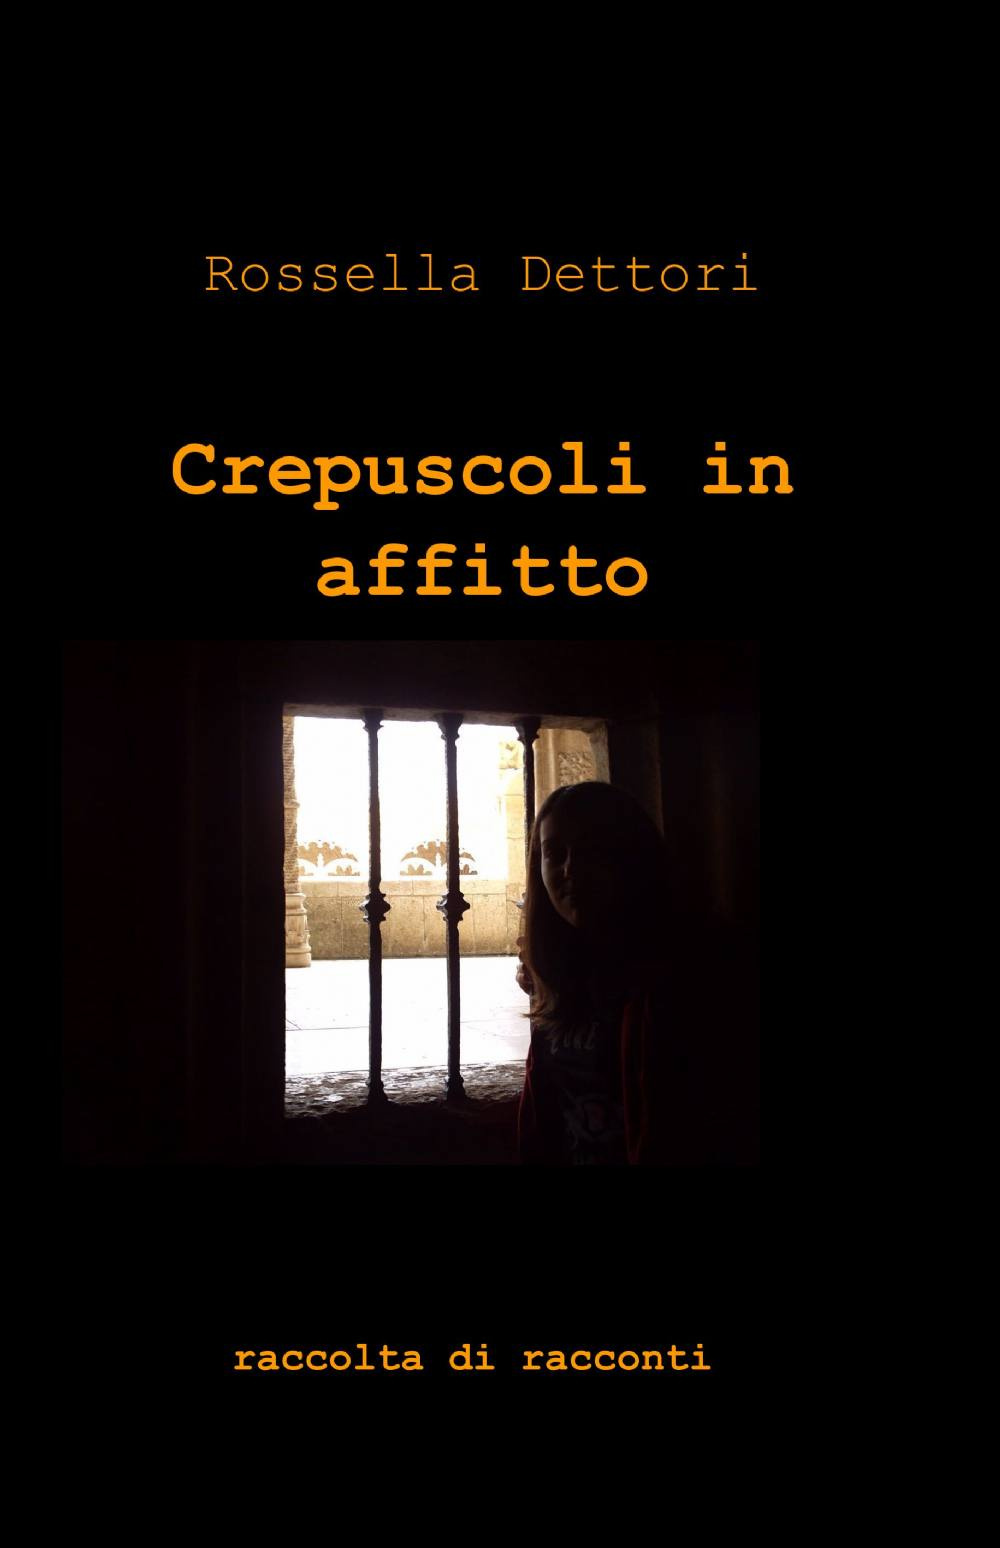 Image of Crepuscoli in affitto